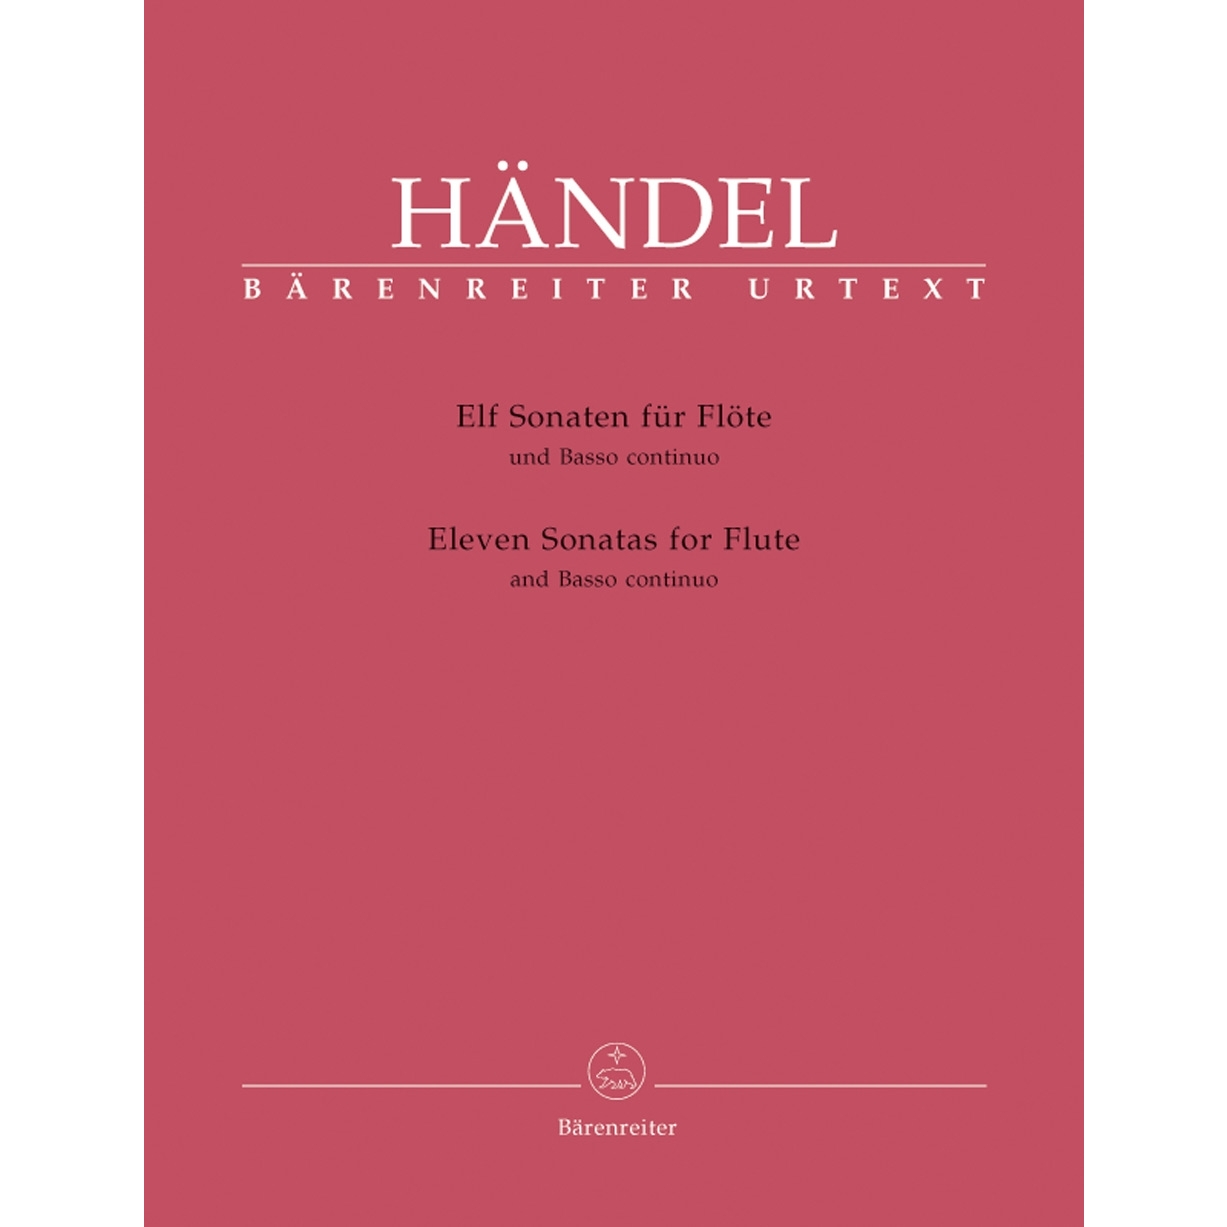 Just - and for Händel. Basso Sonatas G.F. Continuo, Op1 Flute Flutes Eleven